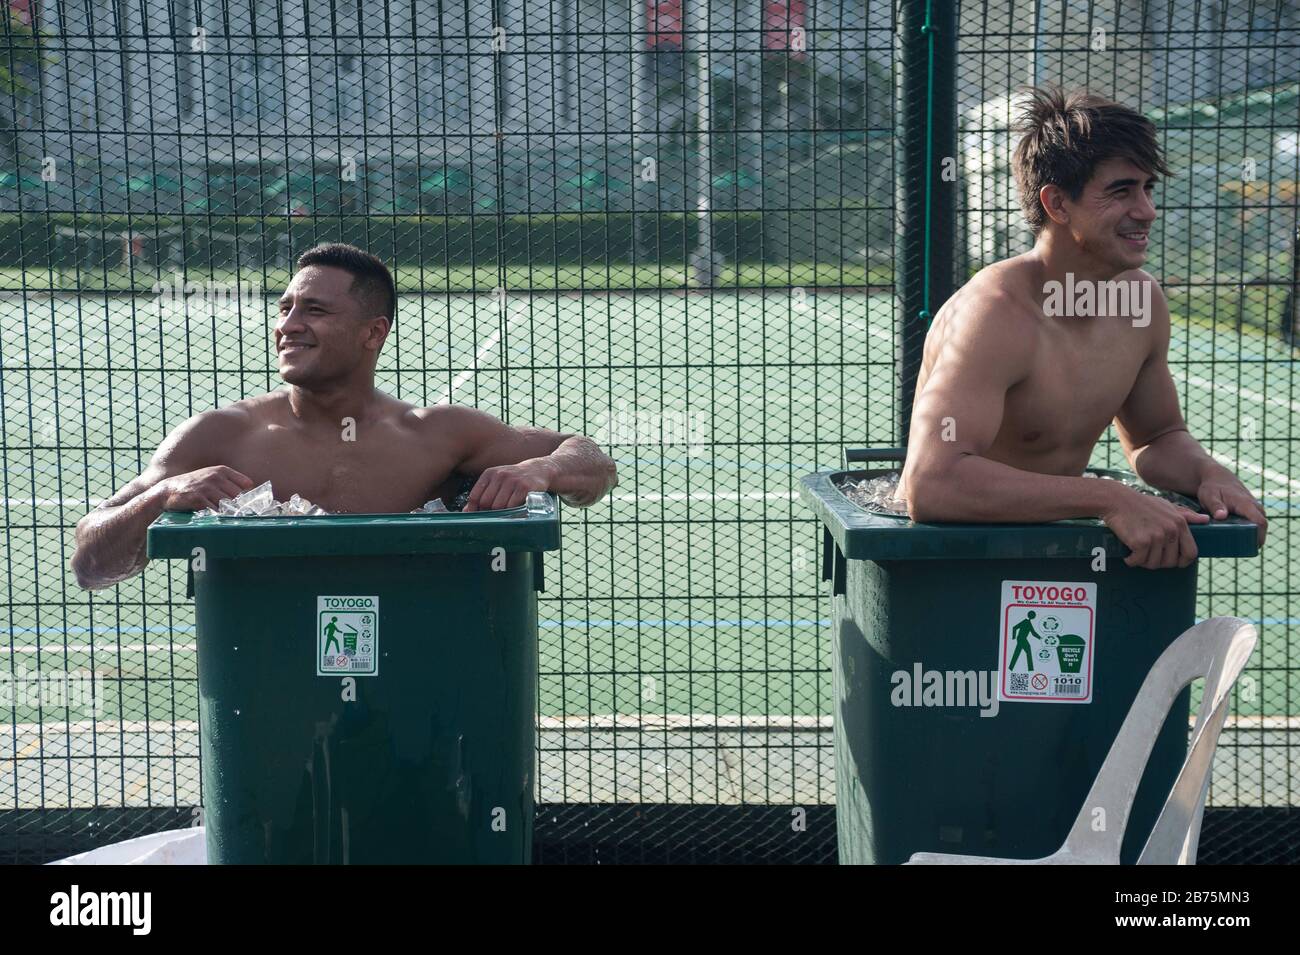 04.11.2017, Singapore, Republic of Singapore, Asia - After a game at the Rugby Sevens Tournament, two players of the Australian rugby team Casuarina Cougars cool down in garbage cans filled with ice water.     Use for editorial purposes only [automated translation] Stock Photo